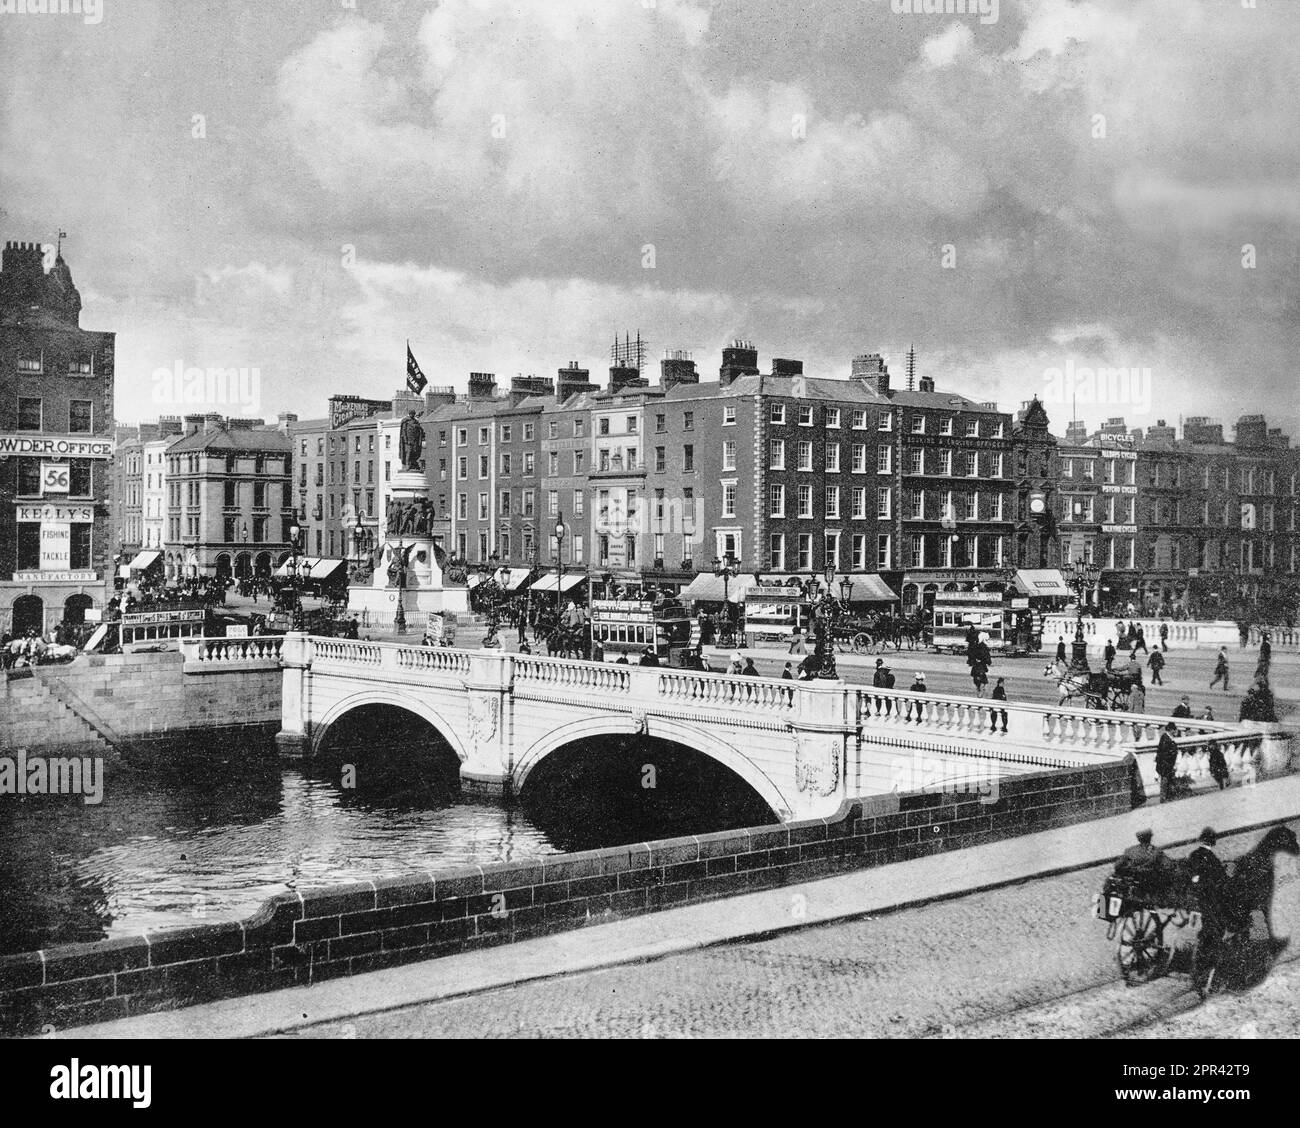 A late 19th century photograph of the busy, O'Connell Bridge crossing the River Liffey in Dublin, Ireland. The original bridge (named Carlisle Bridge after the then Lord Lieutenant of Ireland – Frederick Howard, 5th Earl of Carlisle) was designed by James Gandon, and built between 1791 and 1794. Originally humped and narrower, the bridge was reconstructed and widened between 1877 and 1880. Stock Photo